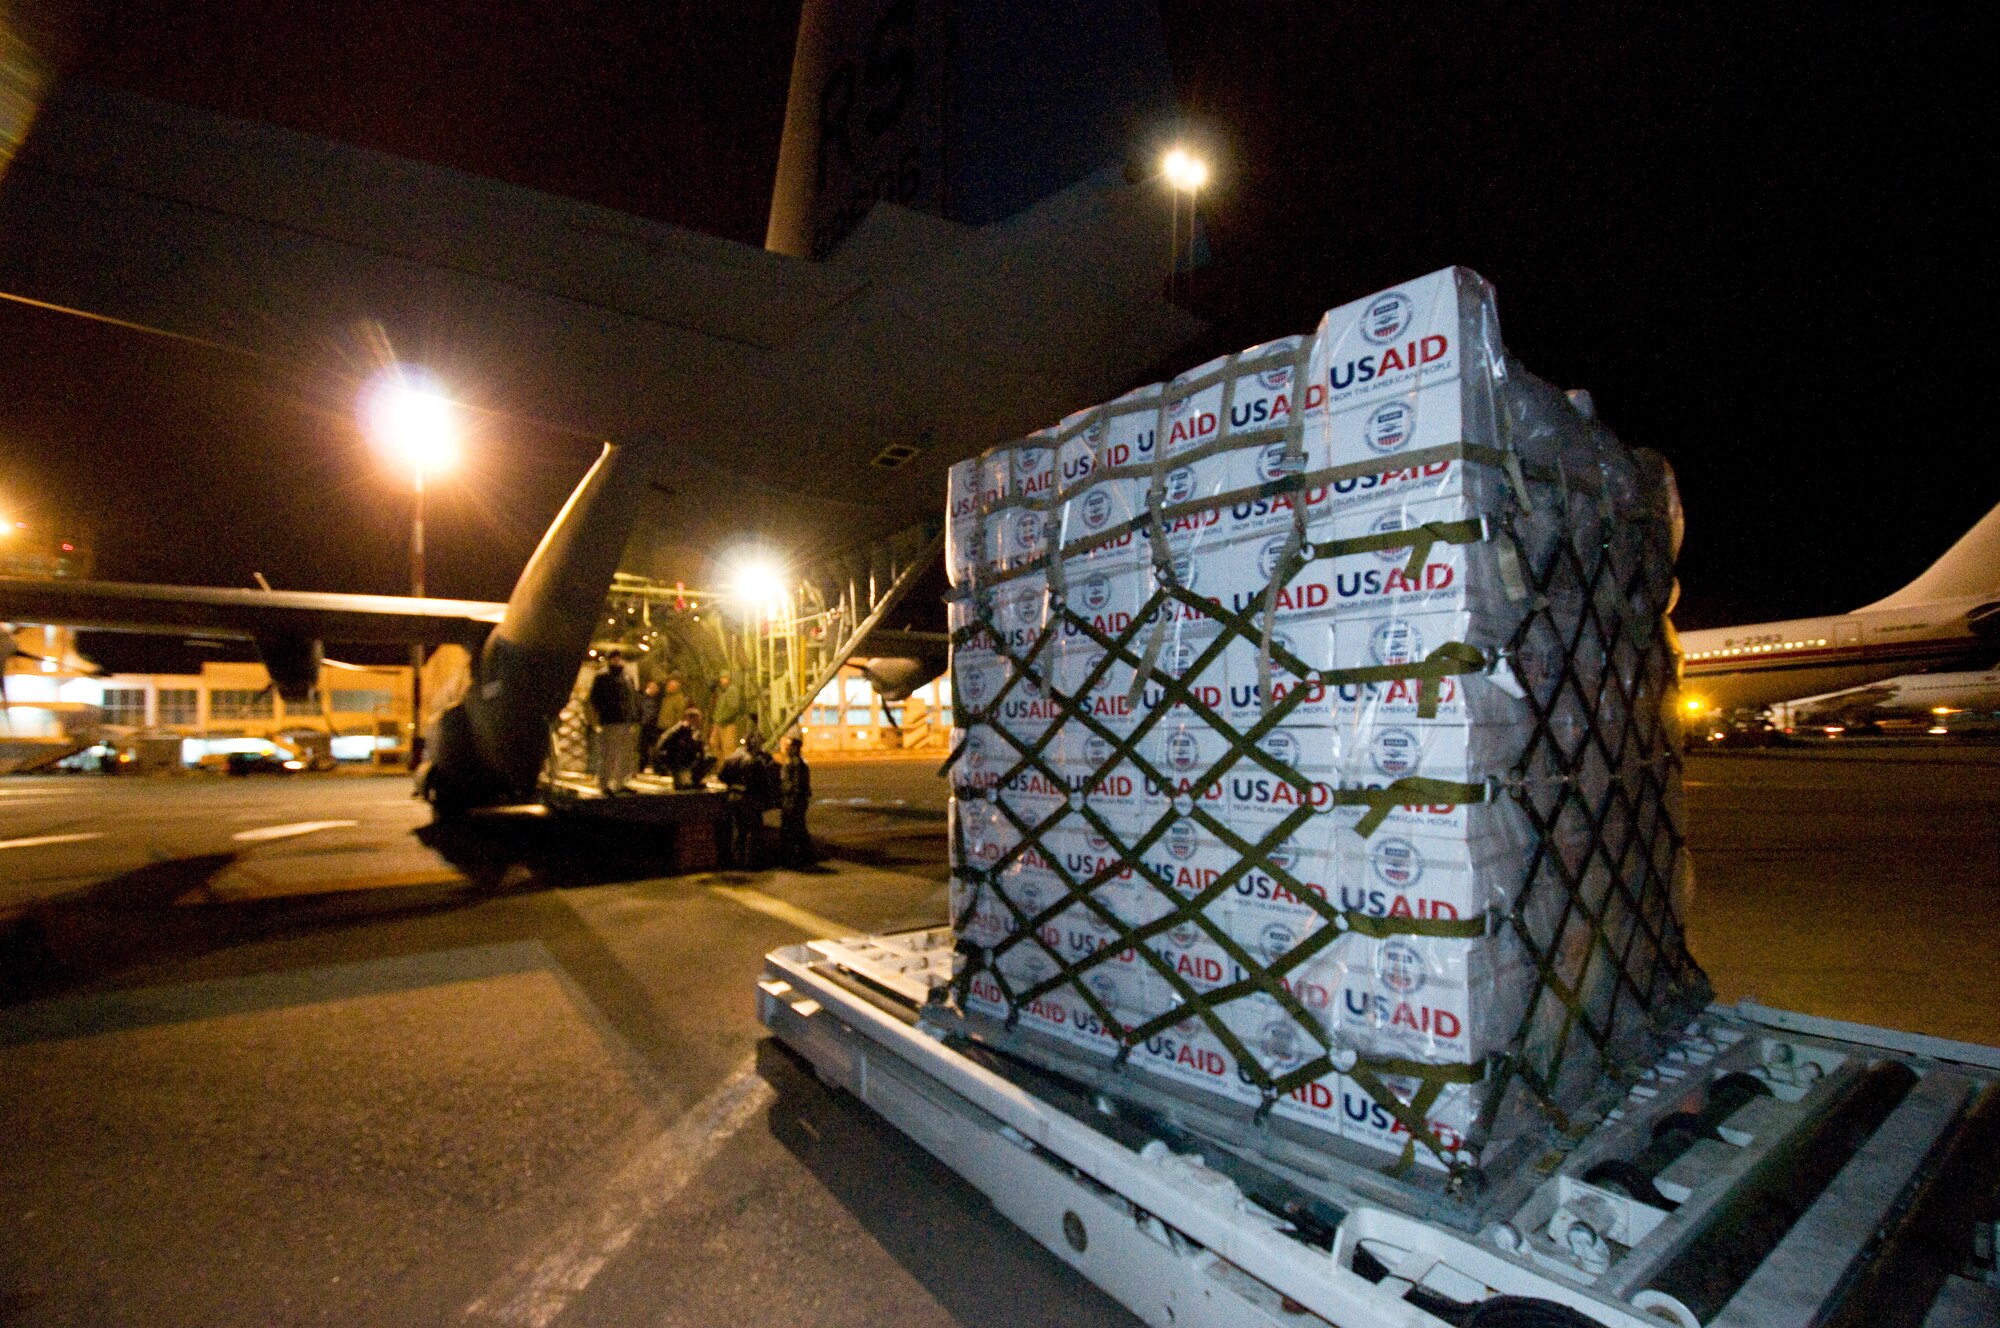 U.S. Airmen with the 435th Air Mobility Squadron, from Ramstein Air Base, Germany, unload blankets, tarps and water containers provided by U.S. AID at Djerba Zarzis Airport in Tunisia. The U.S. government is working with the international community to meet the humanitarian needs of the Lybian people and others in the country who fled across the borders in recent political unrest. (U.S. Army photo by Staff Sgt. Brendan Stephens)  
